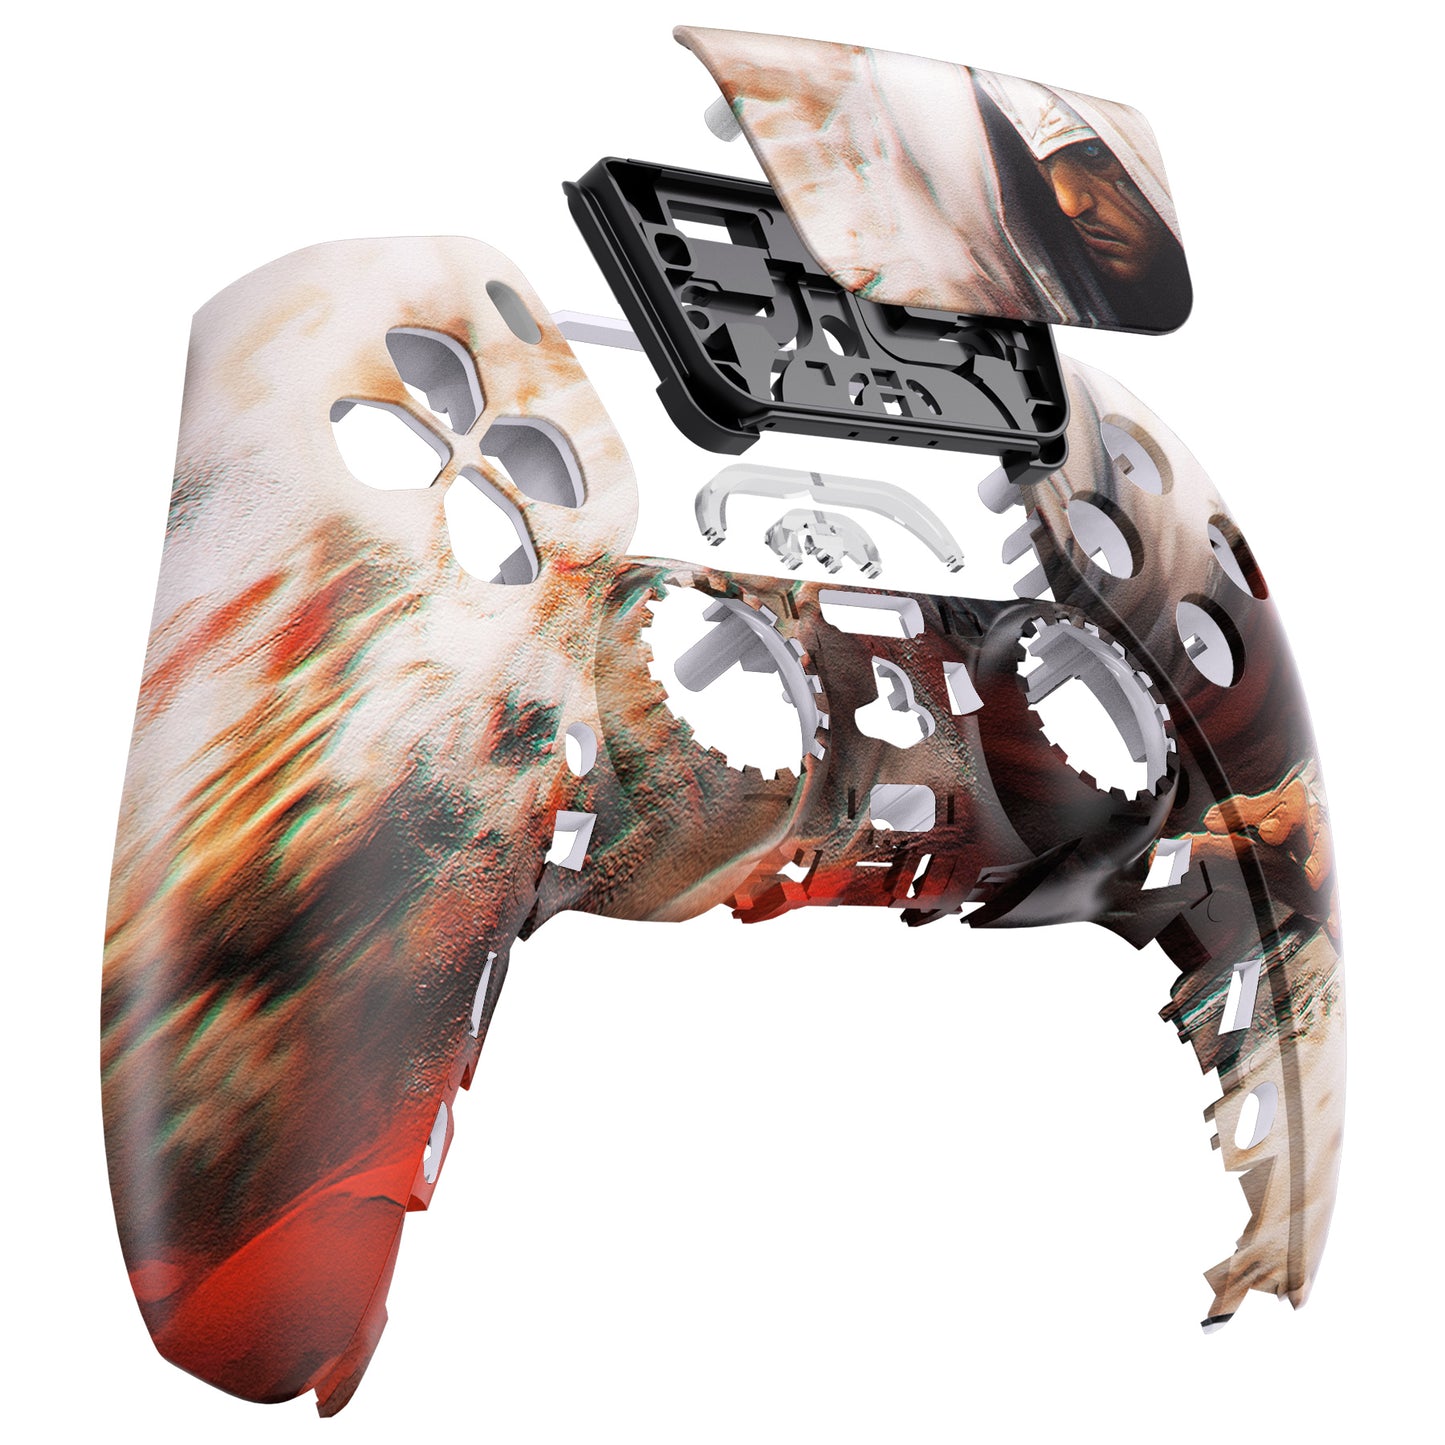 eXtremeRate Replacement Front Housing Shell with Touchpad Compatible with PS5 Controller BDM-010/020/030/040 - Assassin